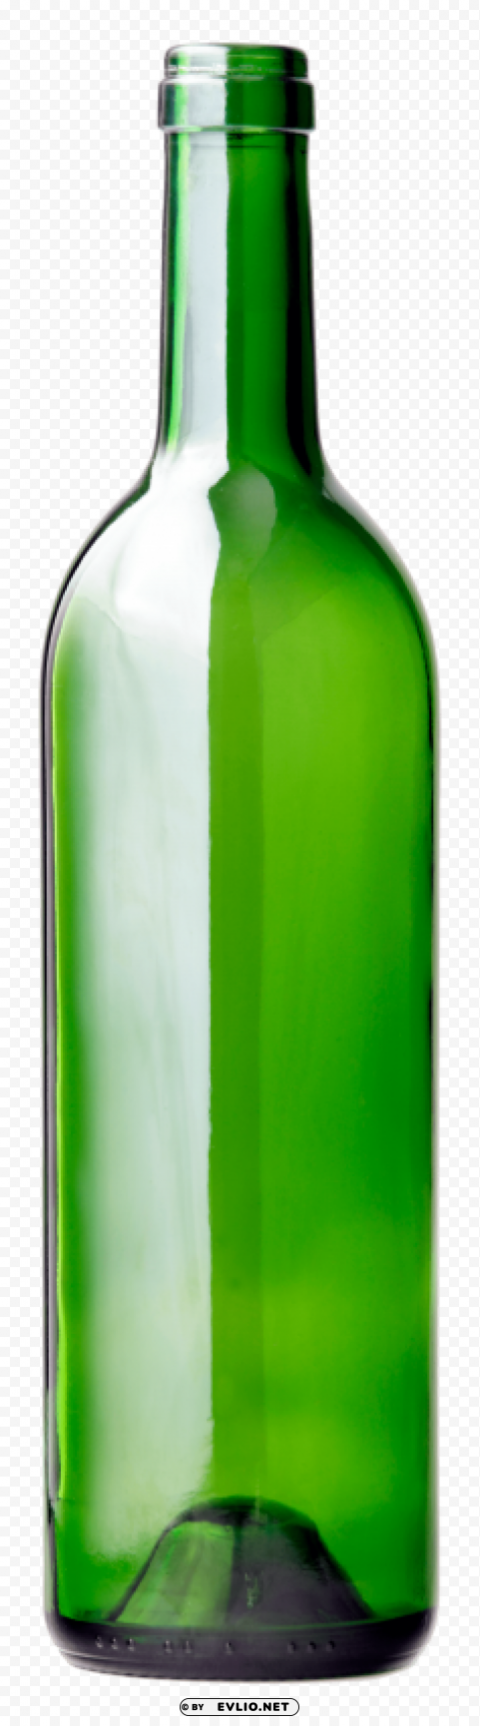 bottle Free PNG images with transparent background